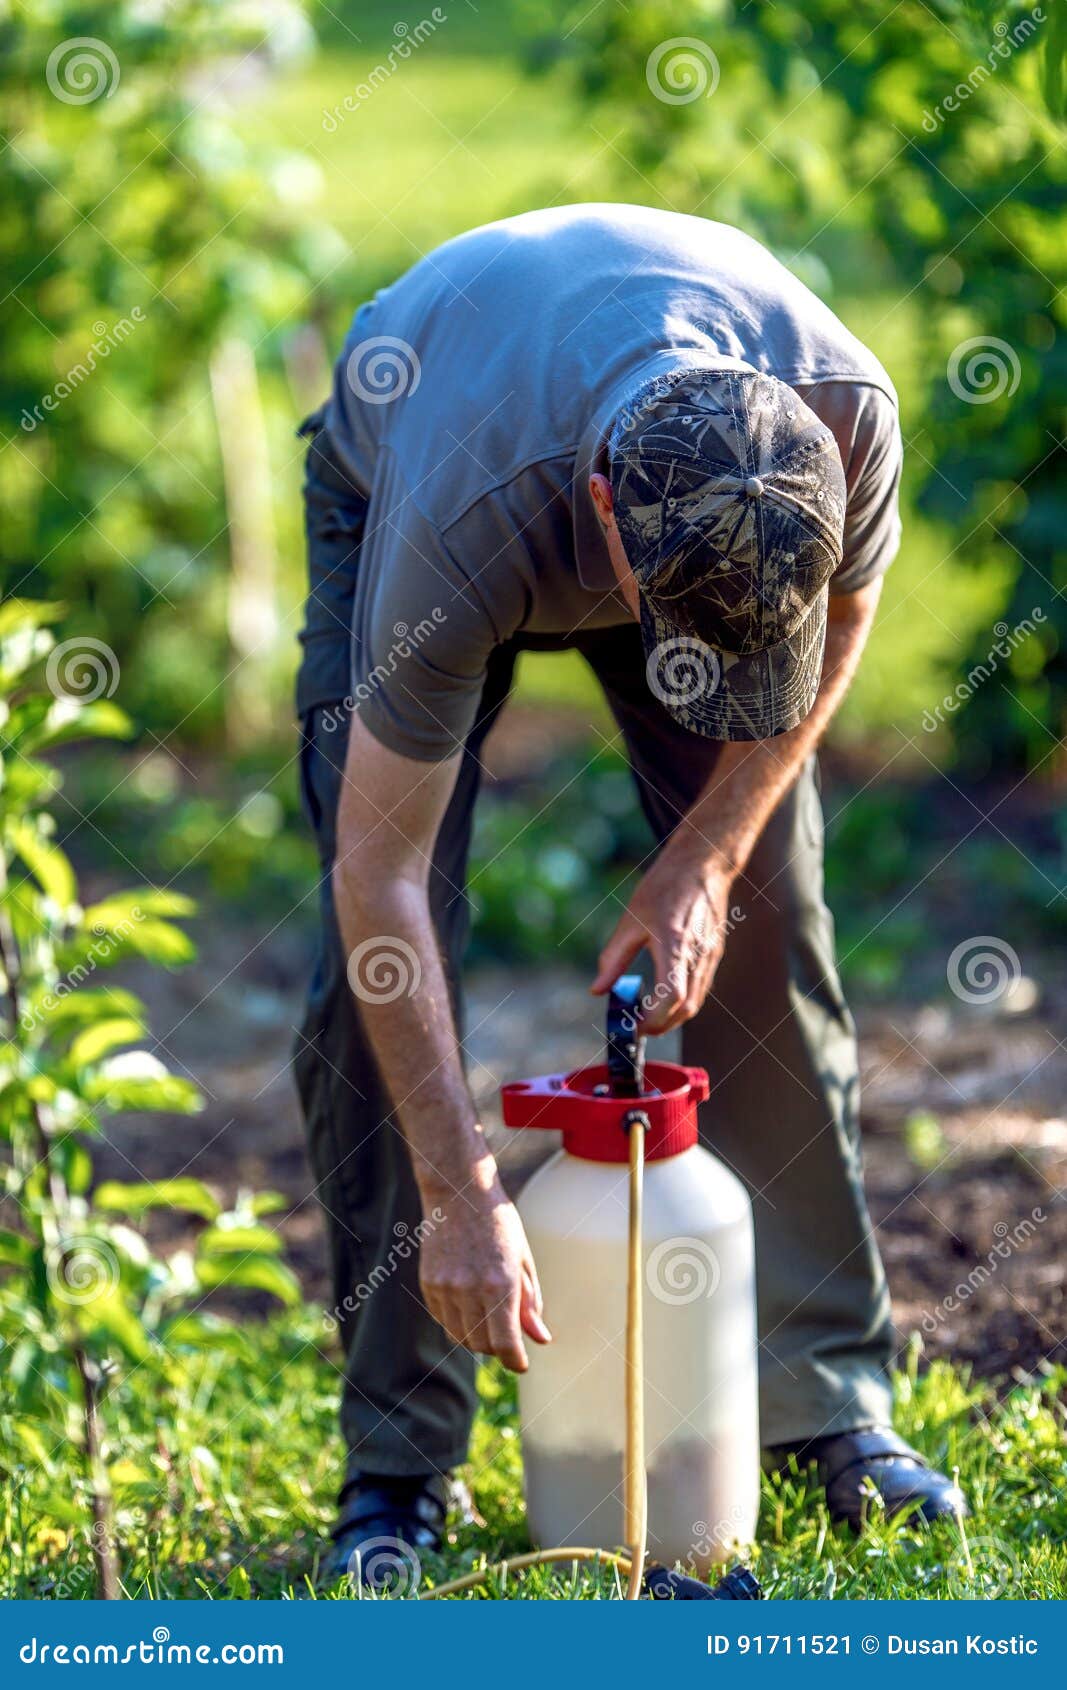 gardener applying an insecticide fertilizer to his fruit shrubs